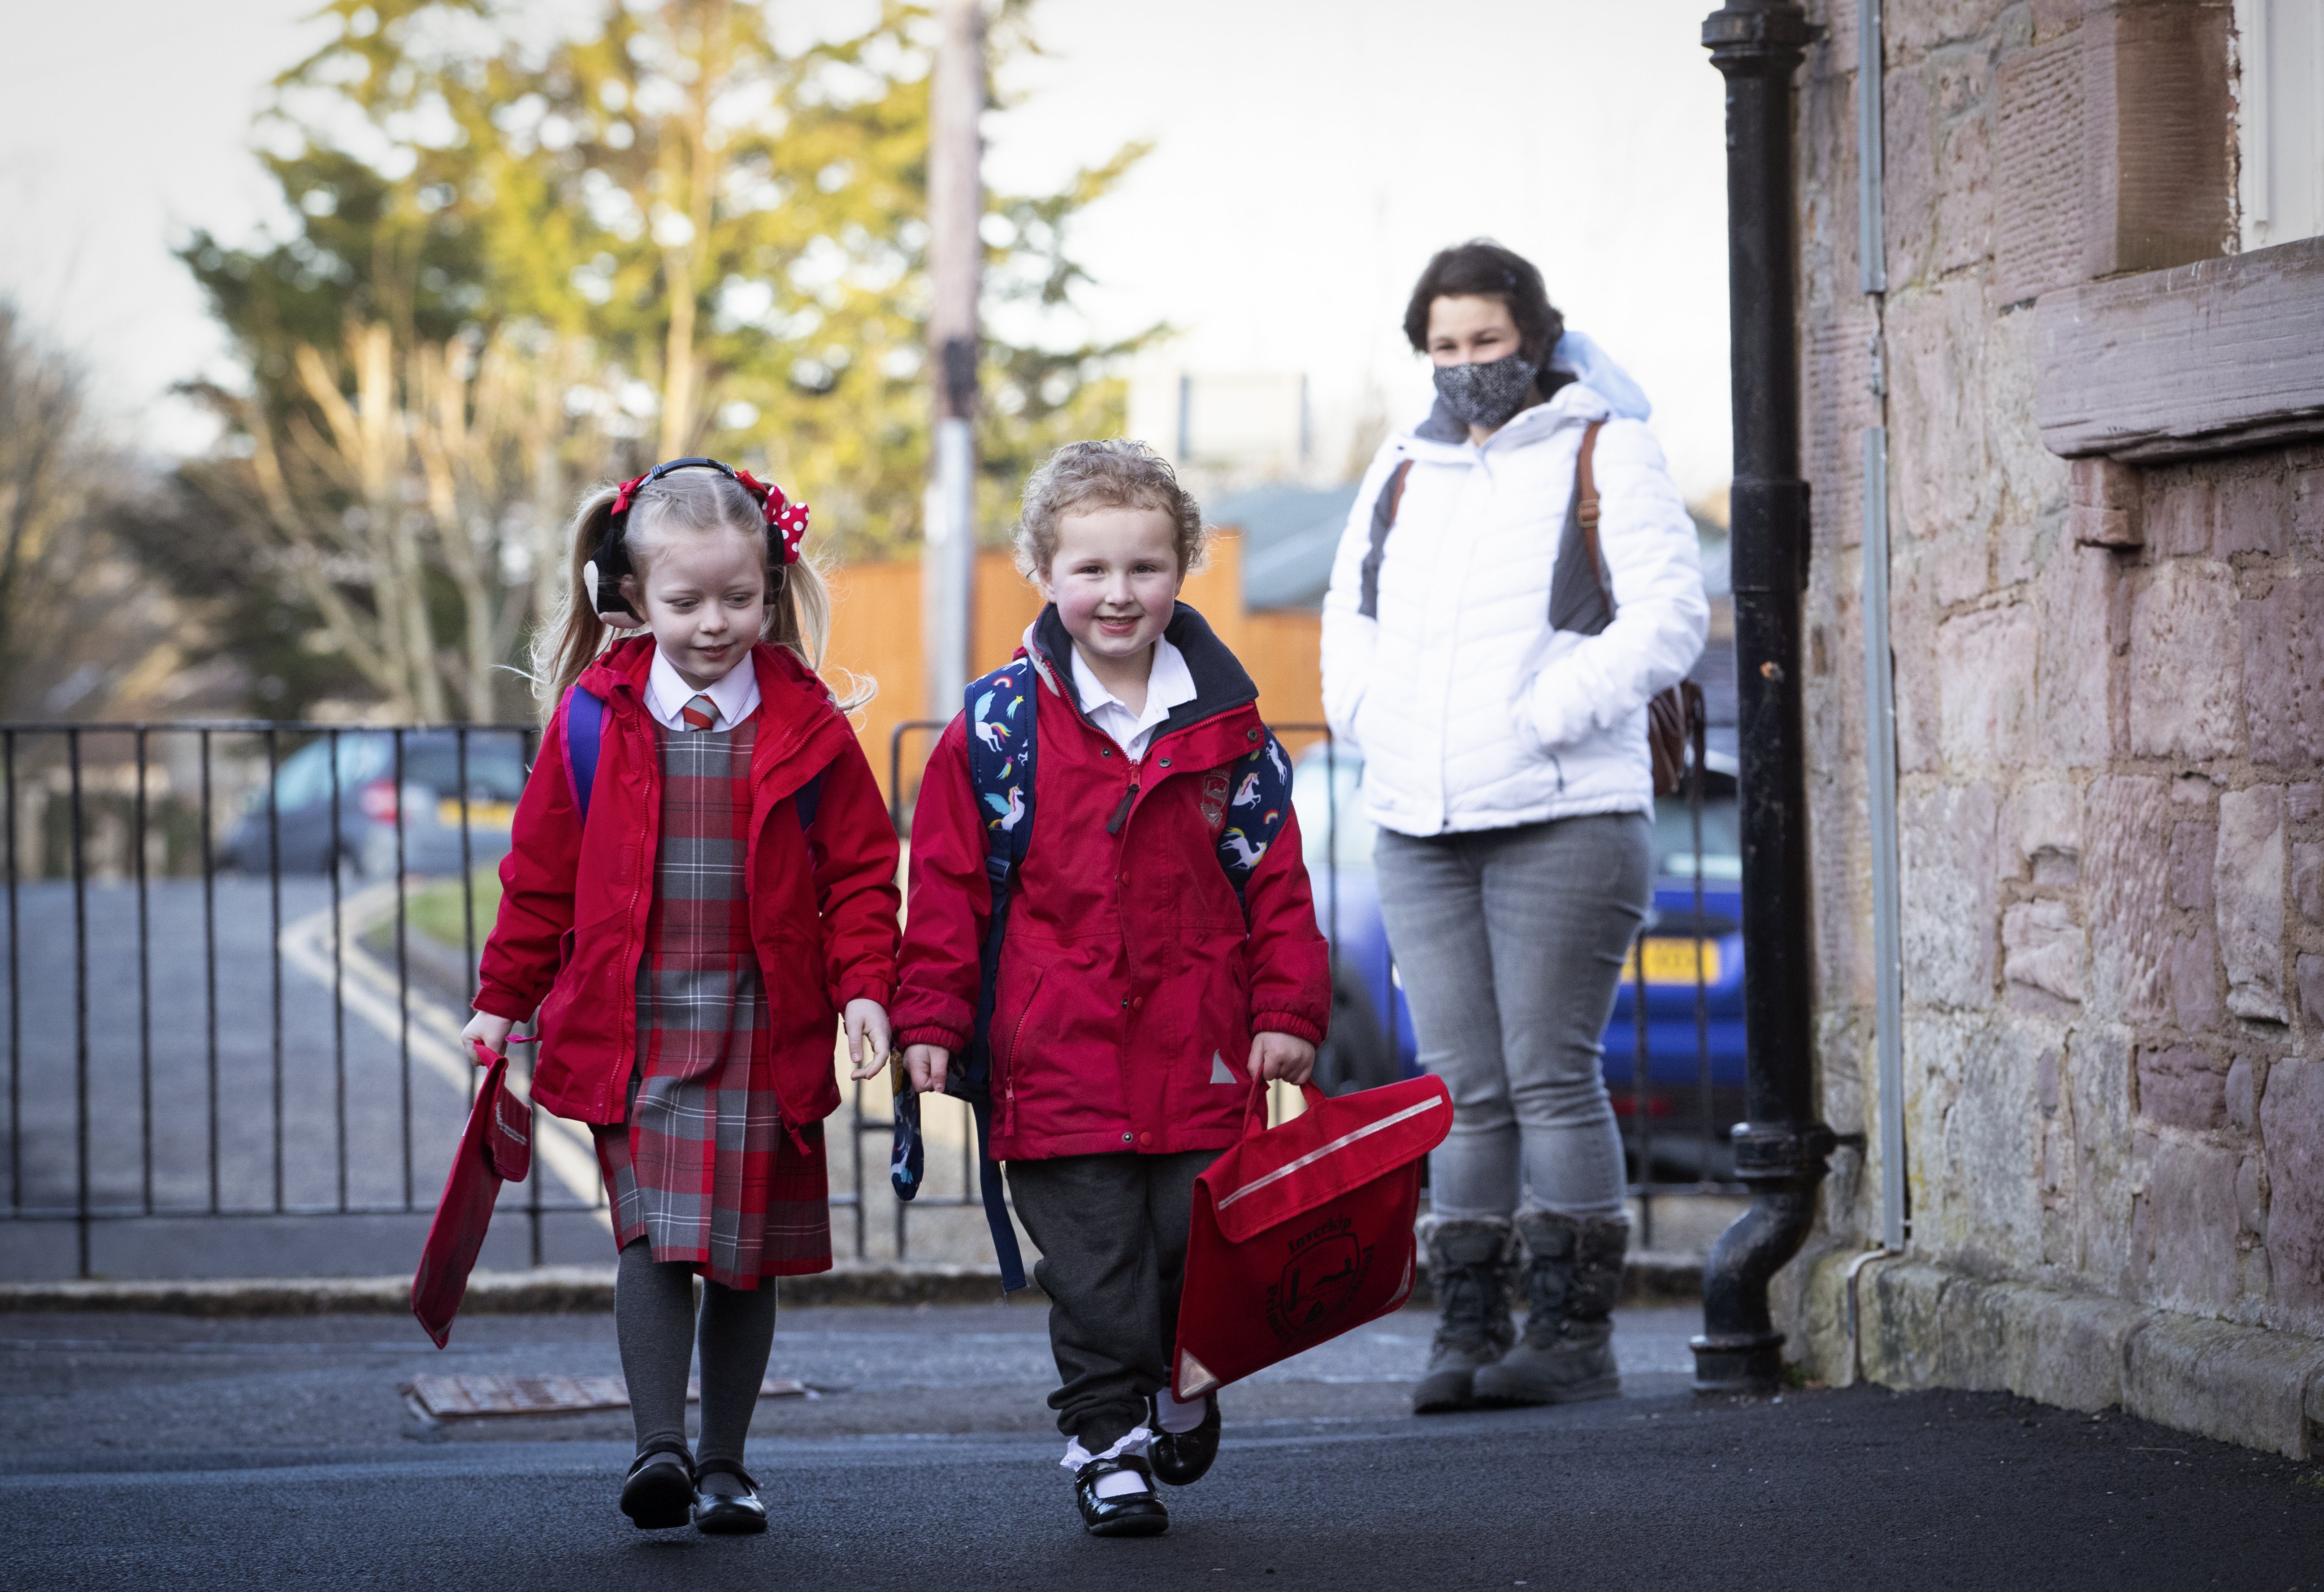 P1 pupils Grace Lee (left) and classmate Grace McKeeman, both aged 5, arrive for their first day back at Inverkip Primary School.